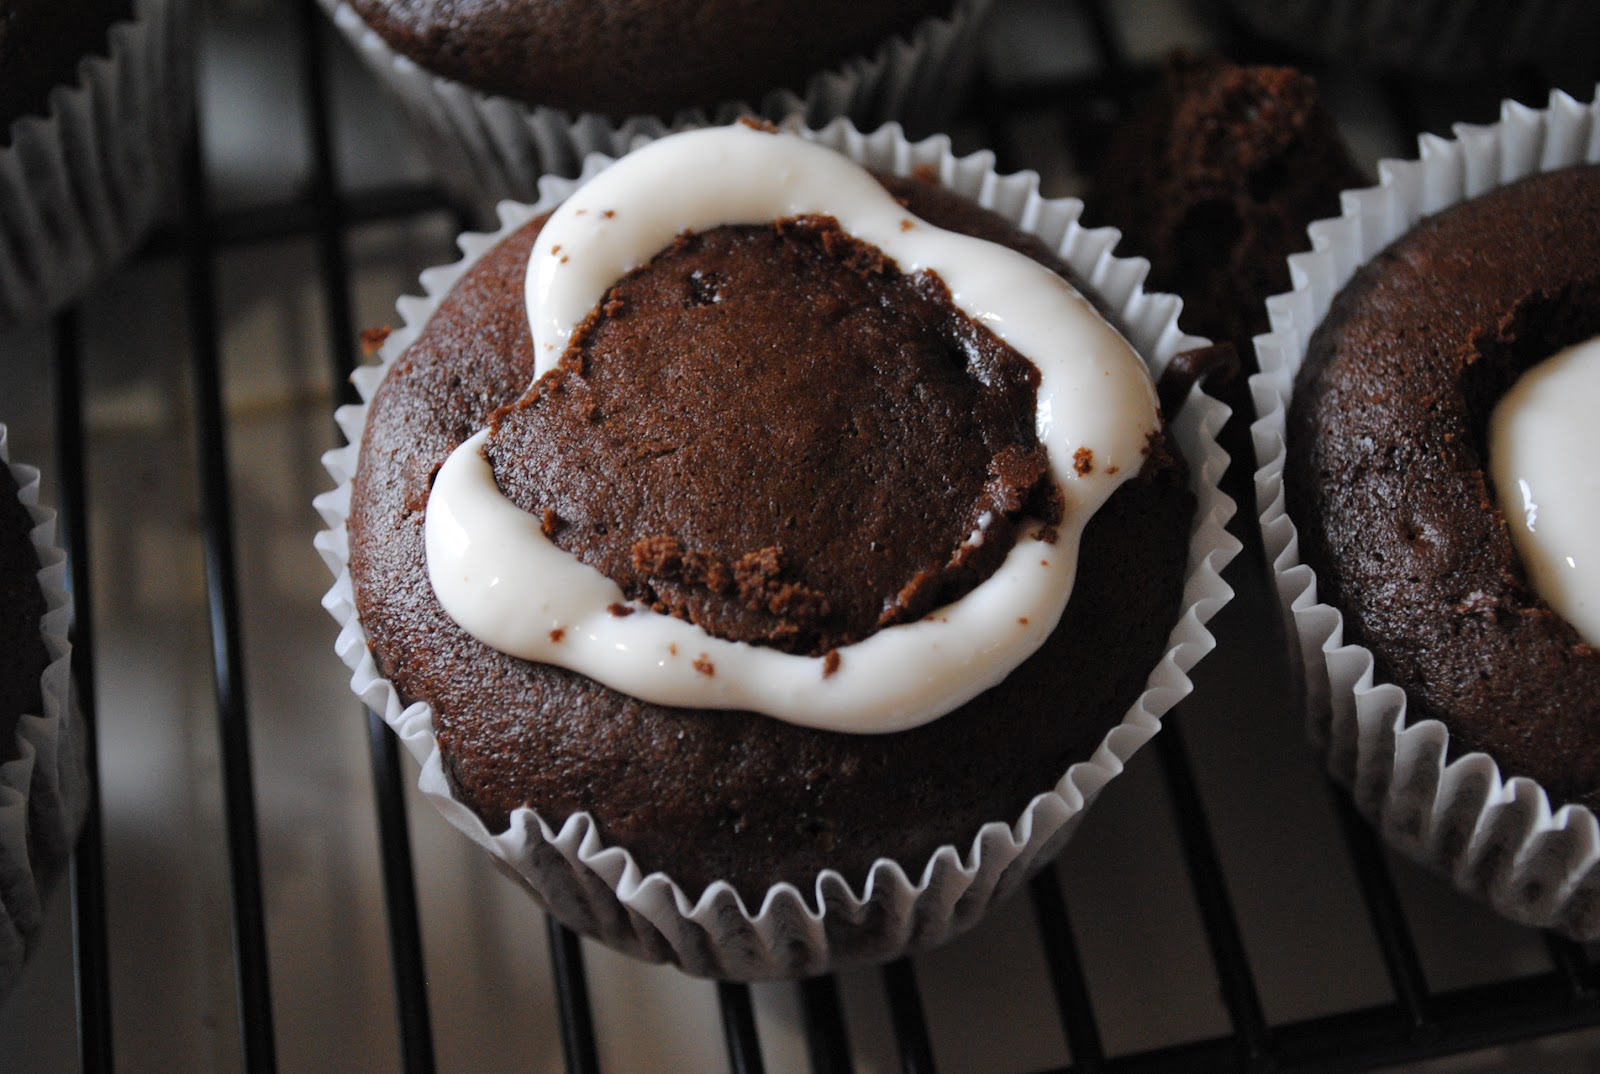 Delectably Home: Cream Cheese Filled Chocolate Cupcakes